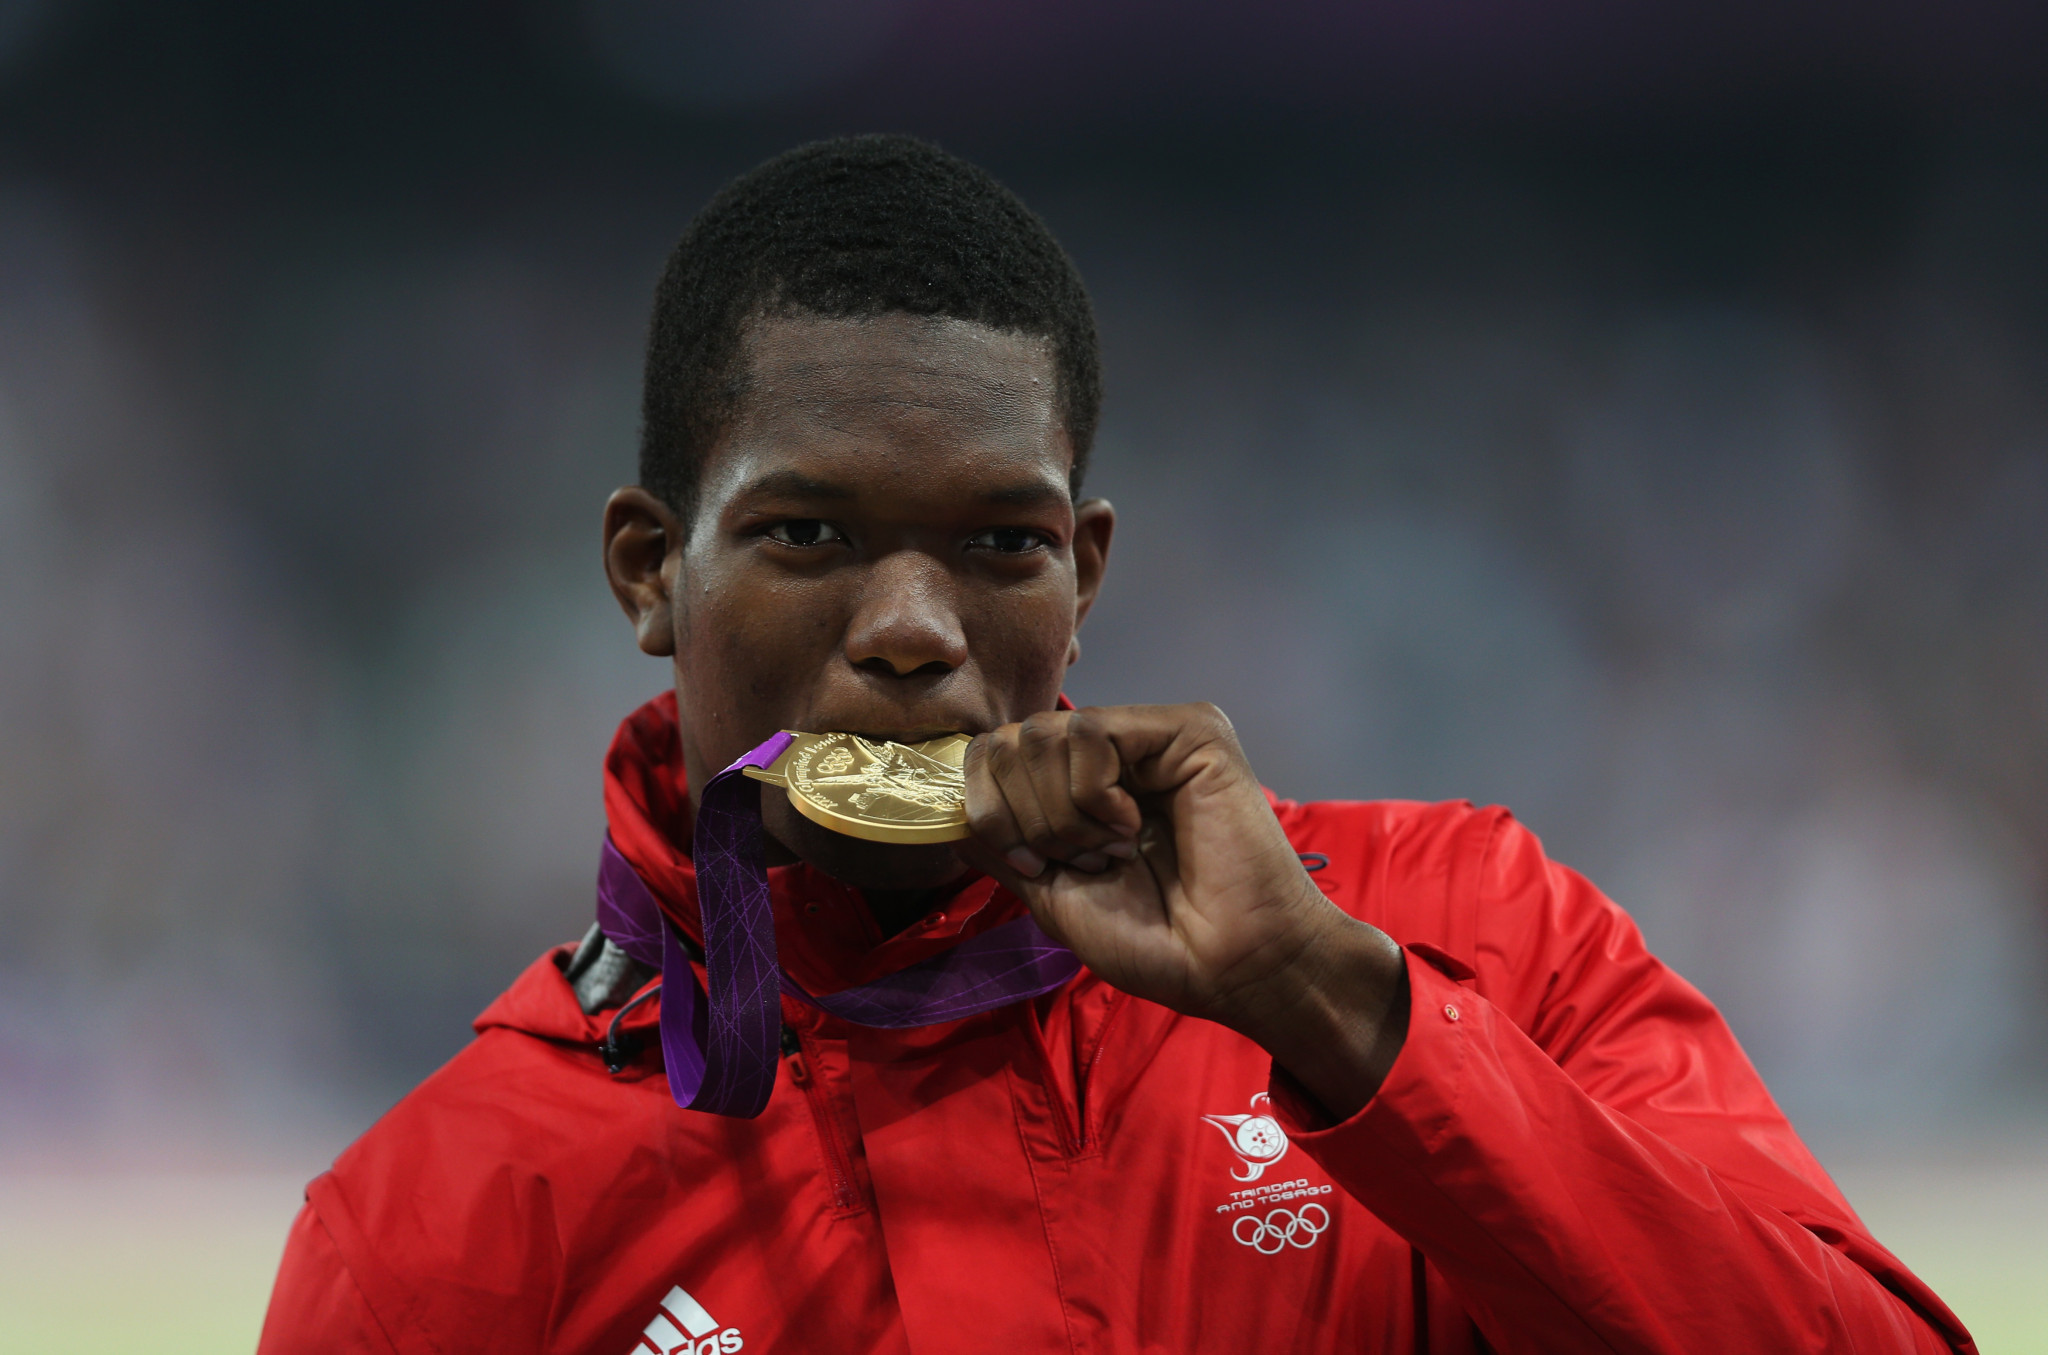 Keshorn Walcott was Trinidad and Tobago's last Olympic gold medal, at London 2012  ©Getty Images